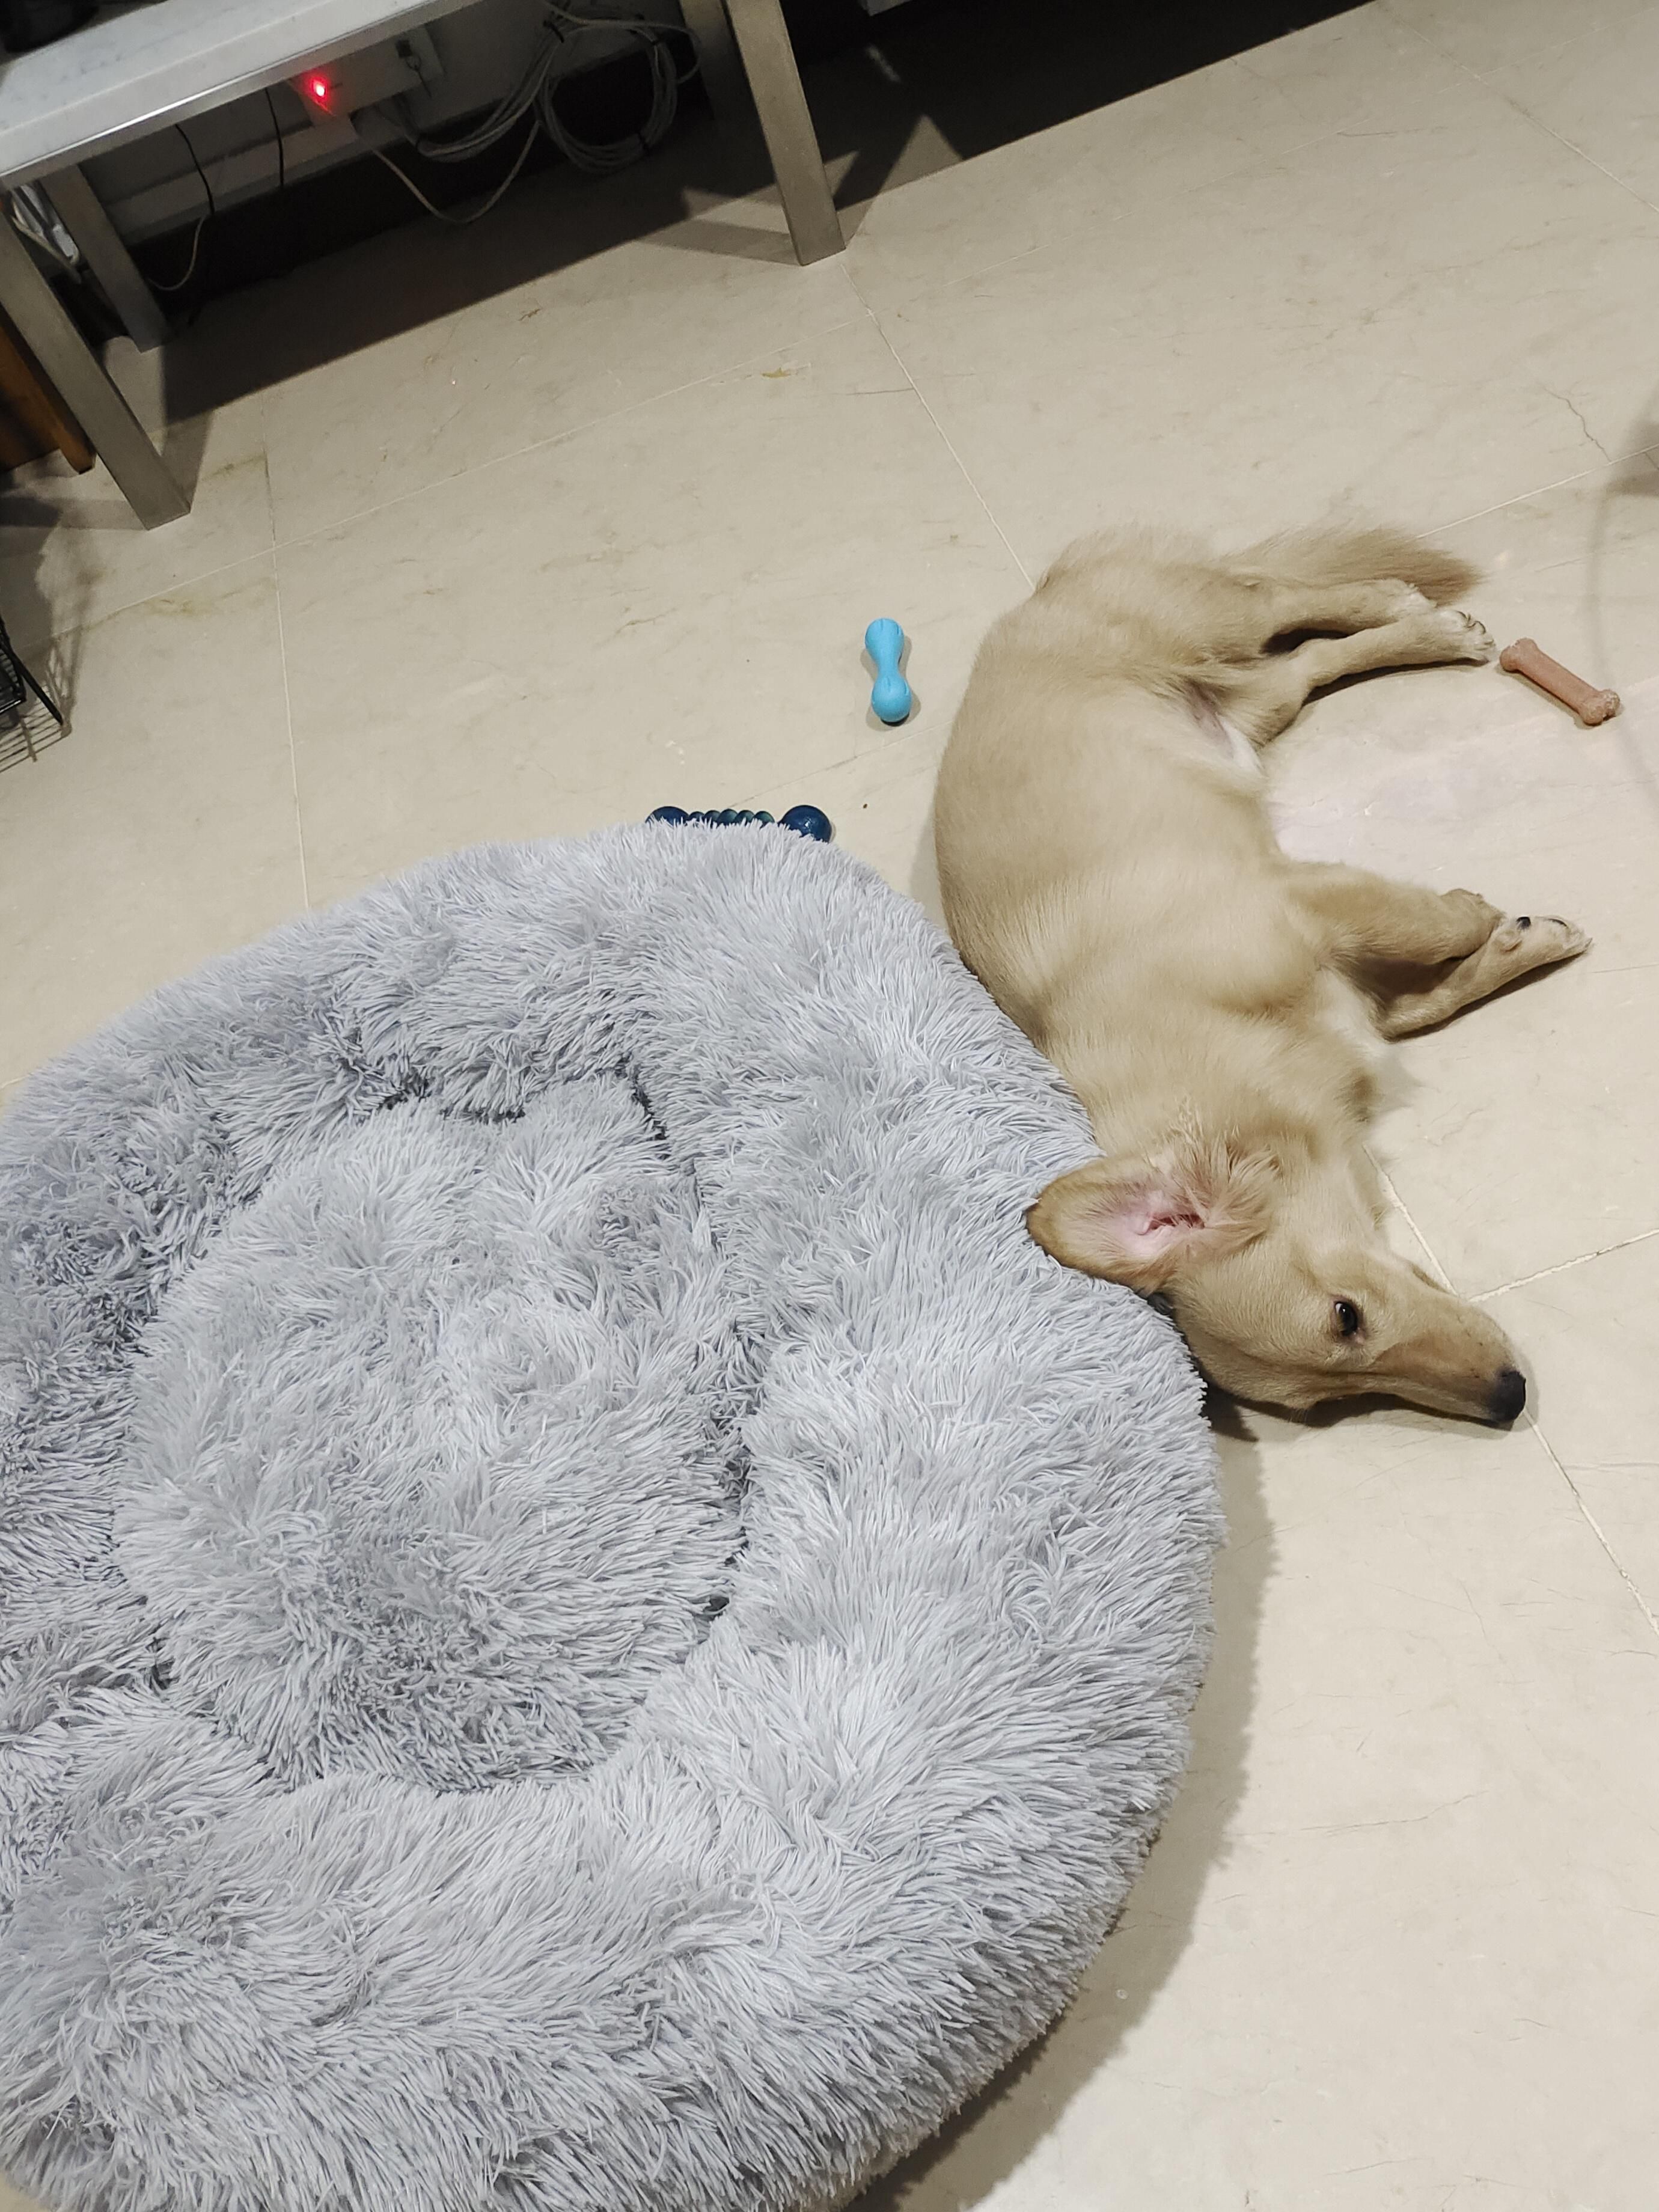 Bought a $200 bed... chooses the floor instead.